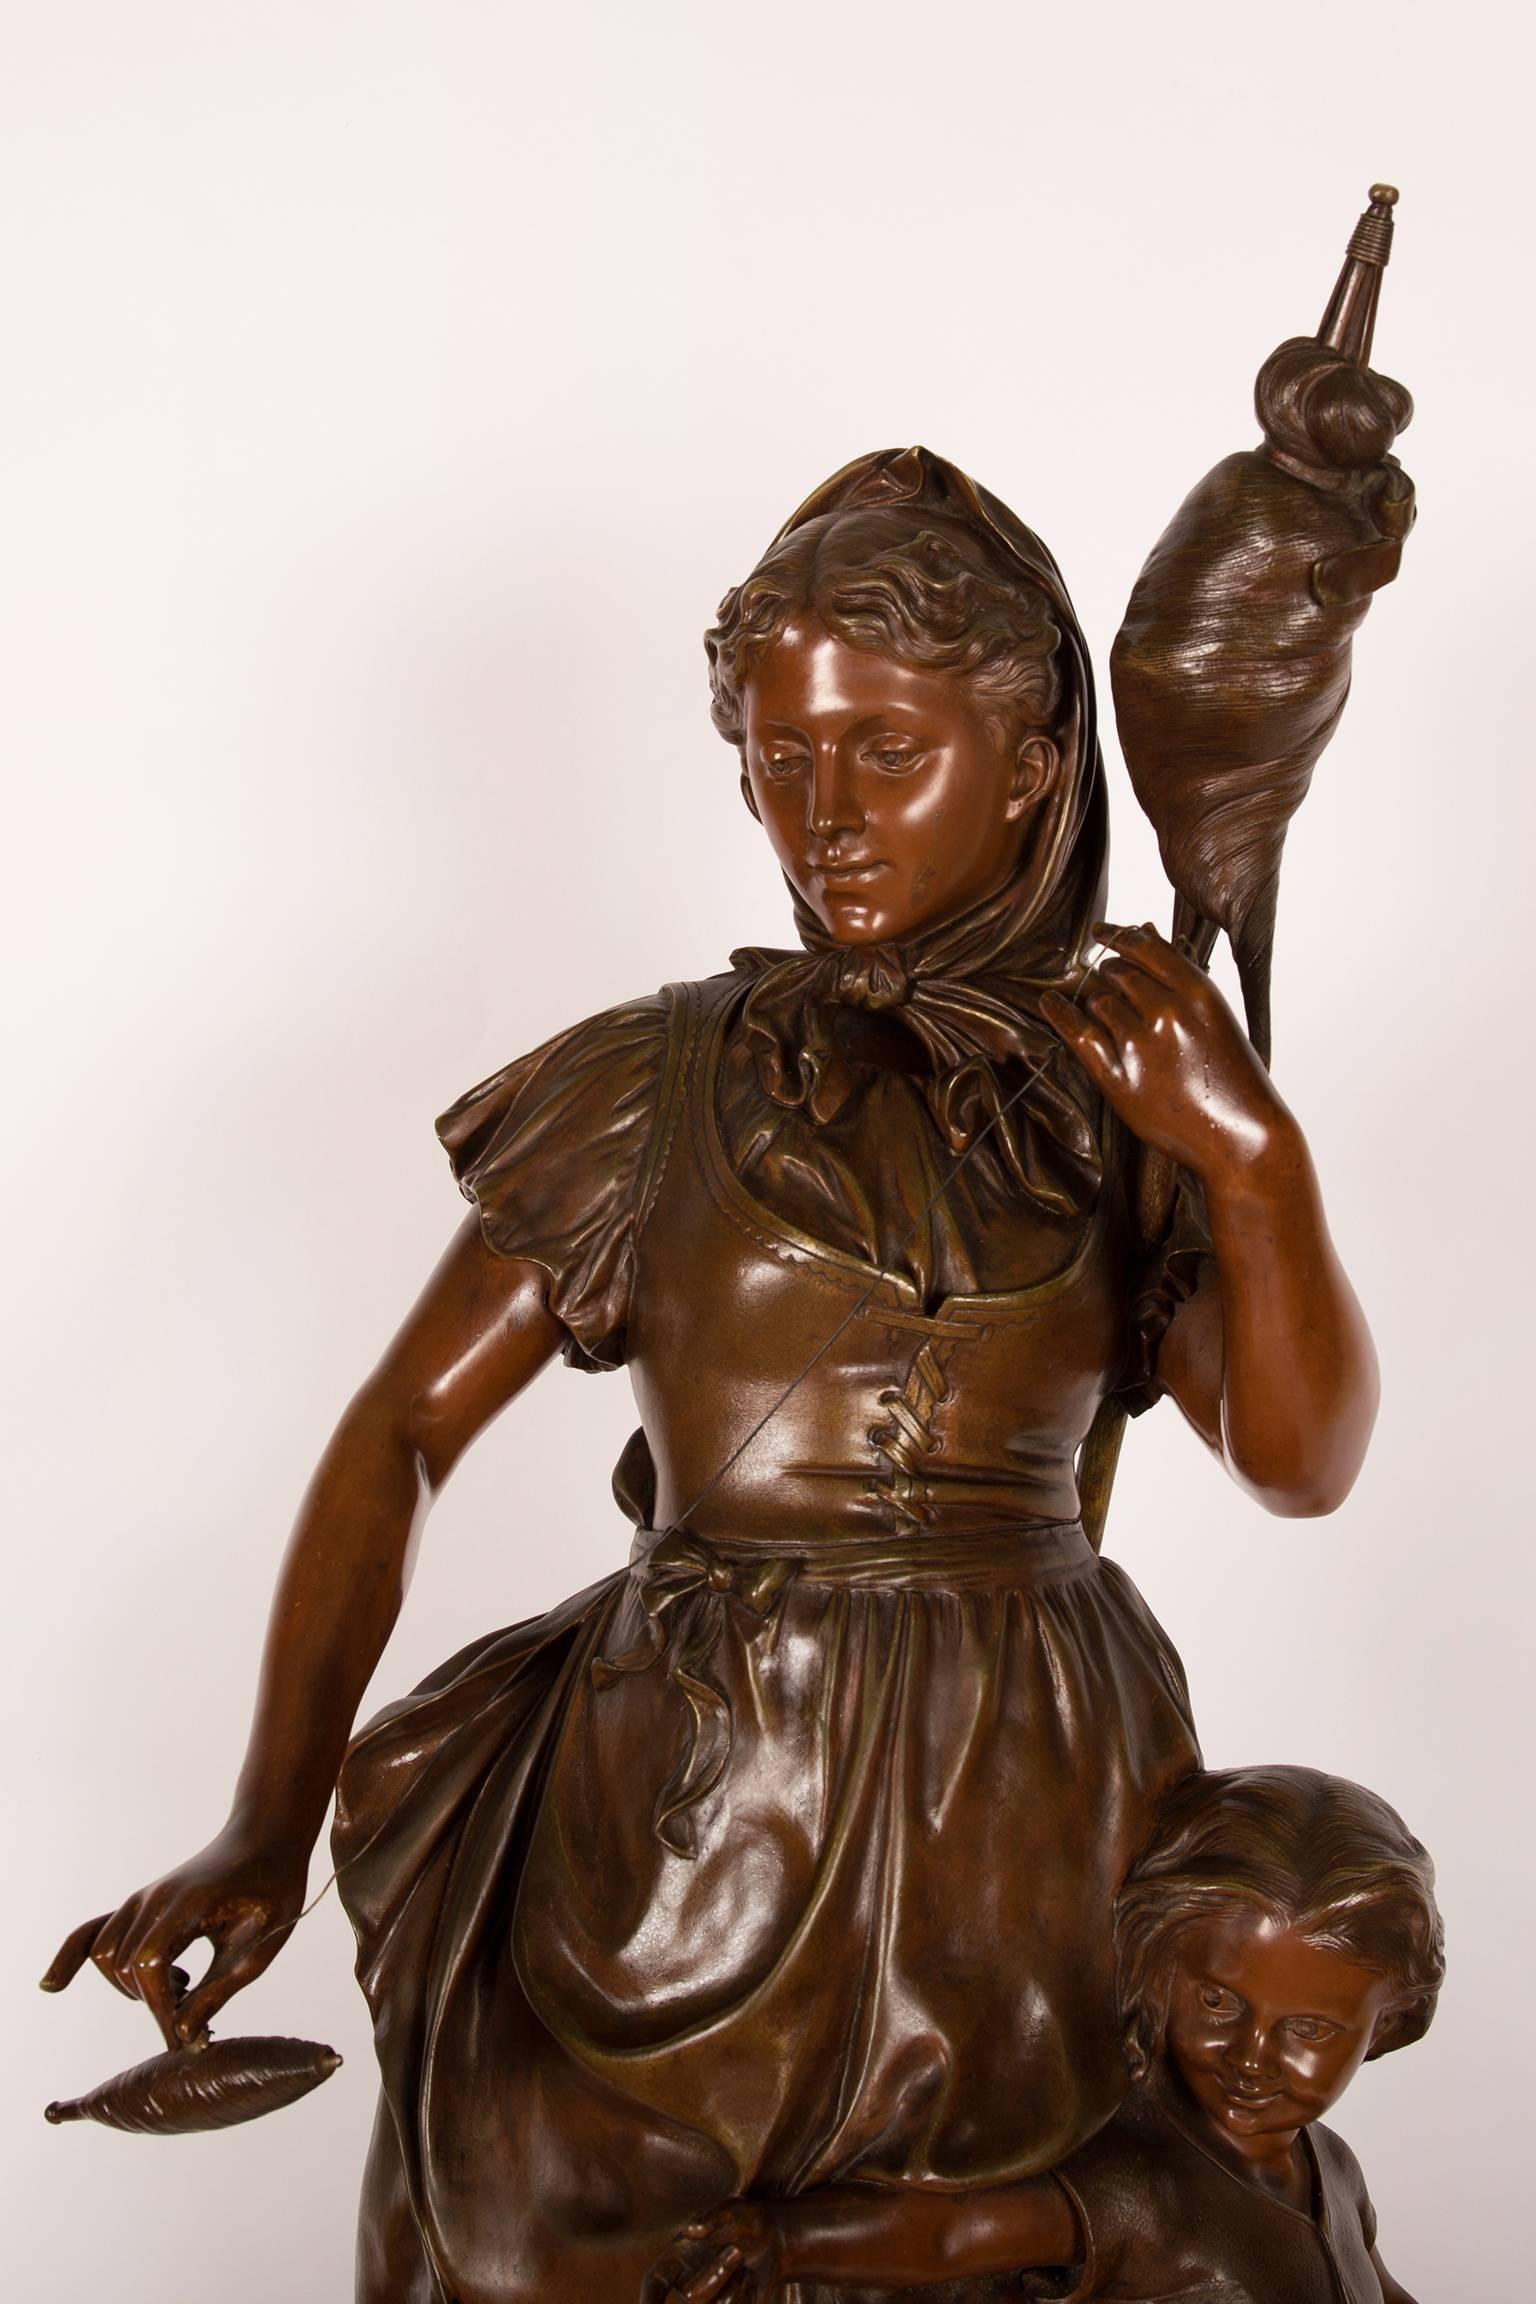 Large patinated bronze sculpture of a mother and child, the mother holding a distaff and a spindle. It is a French Romantic period genre scene symbolising rural domestic life and Motherhood. The sculpture is in very good condition and has a